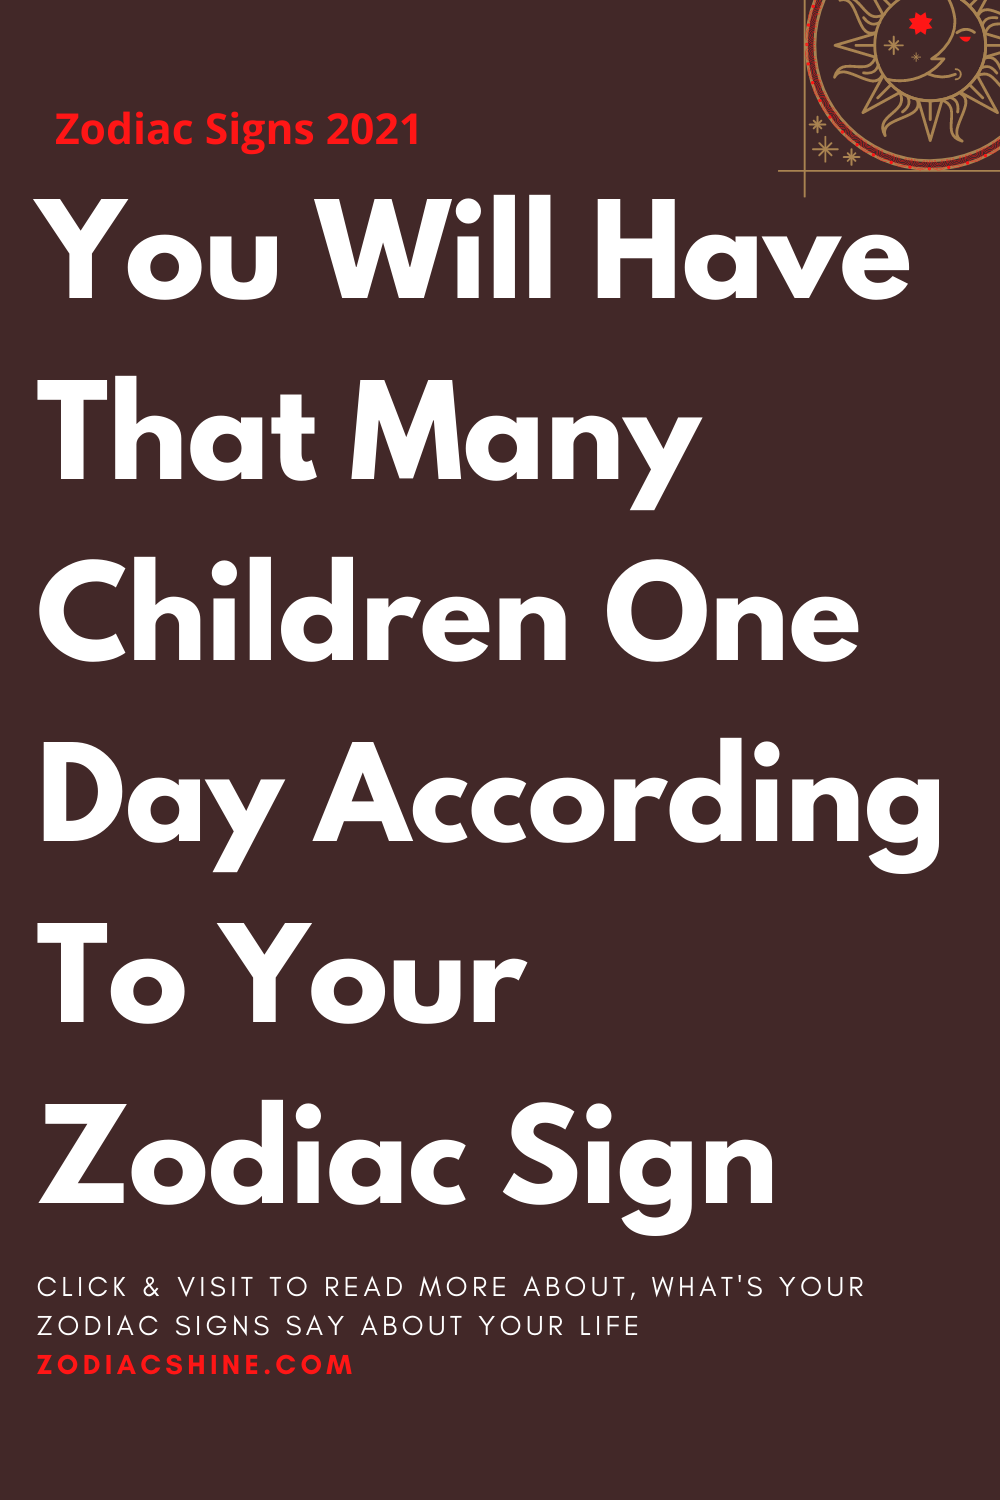 You Will Have That Many Children One Day According To Your Zodiac Sign